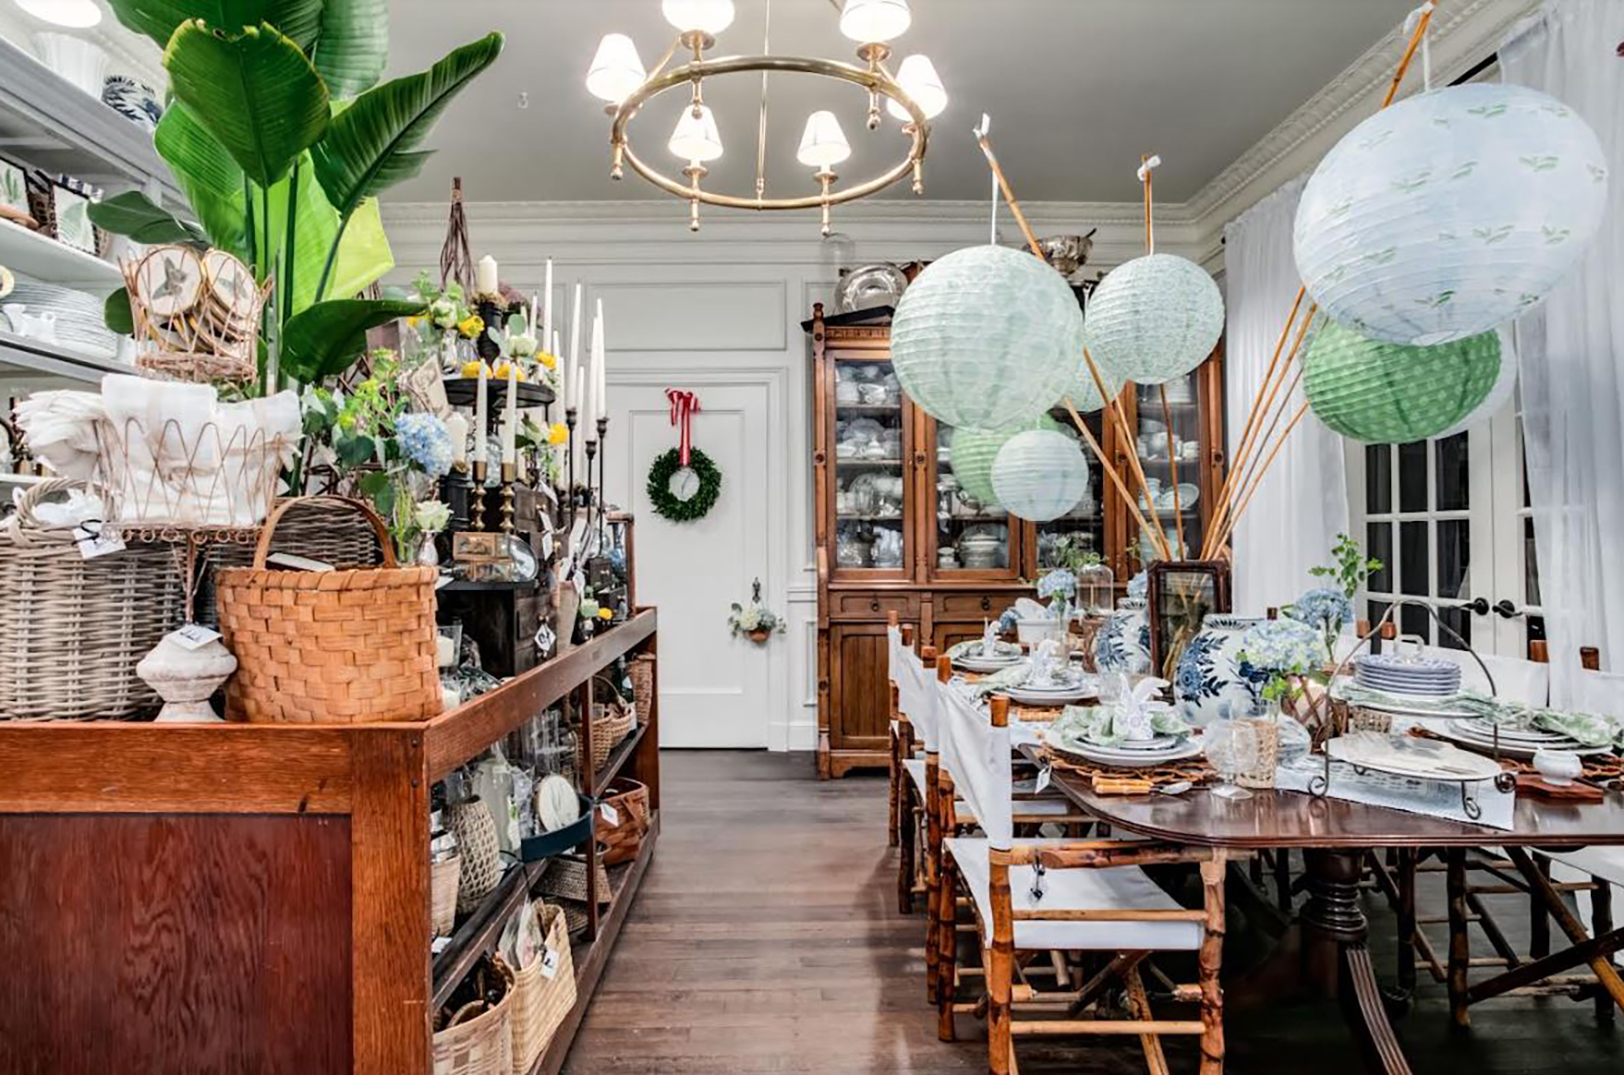 Nell Hill’s founder returns to retail with ‘this little secret’ — a micro shop with an old-fashioned, in-store experience